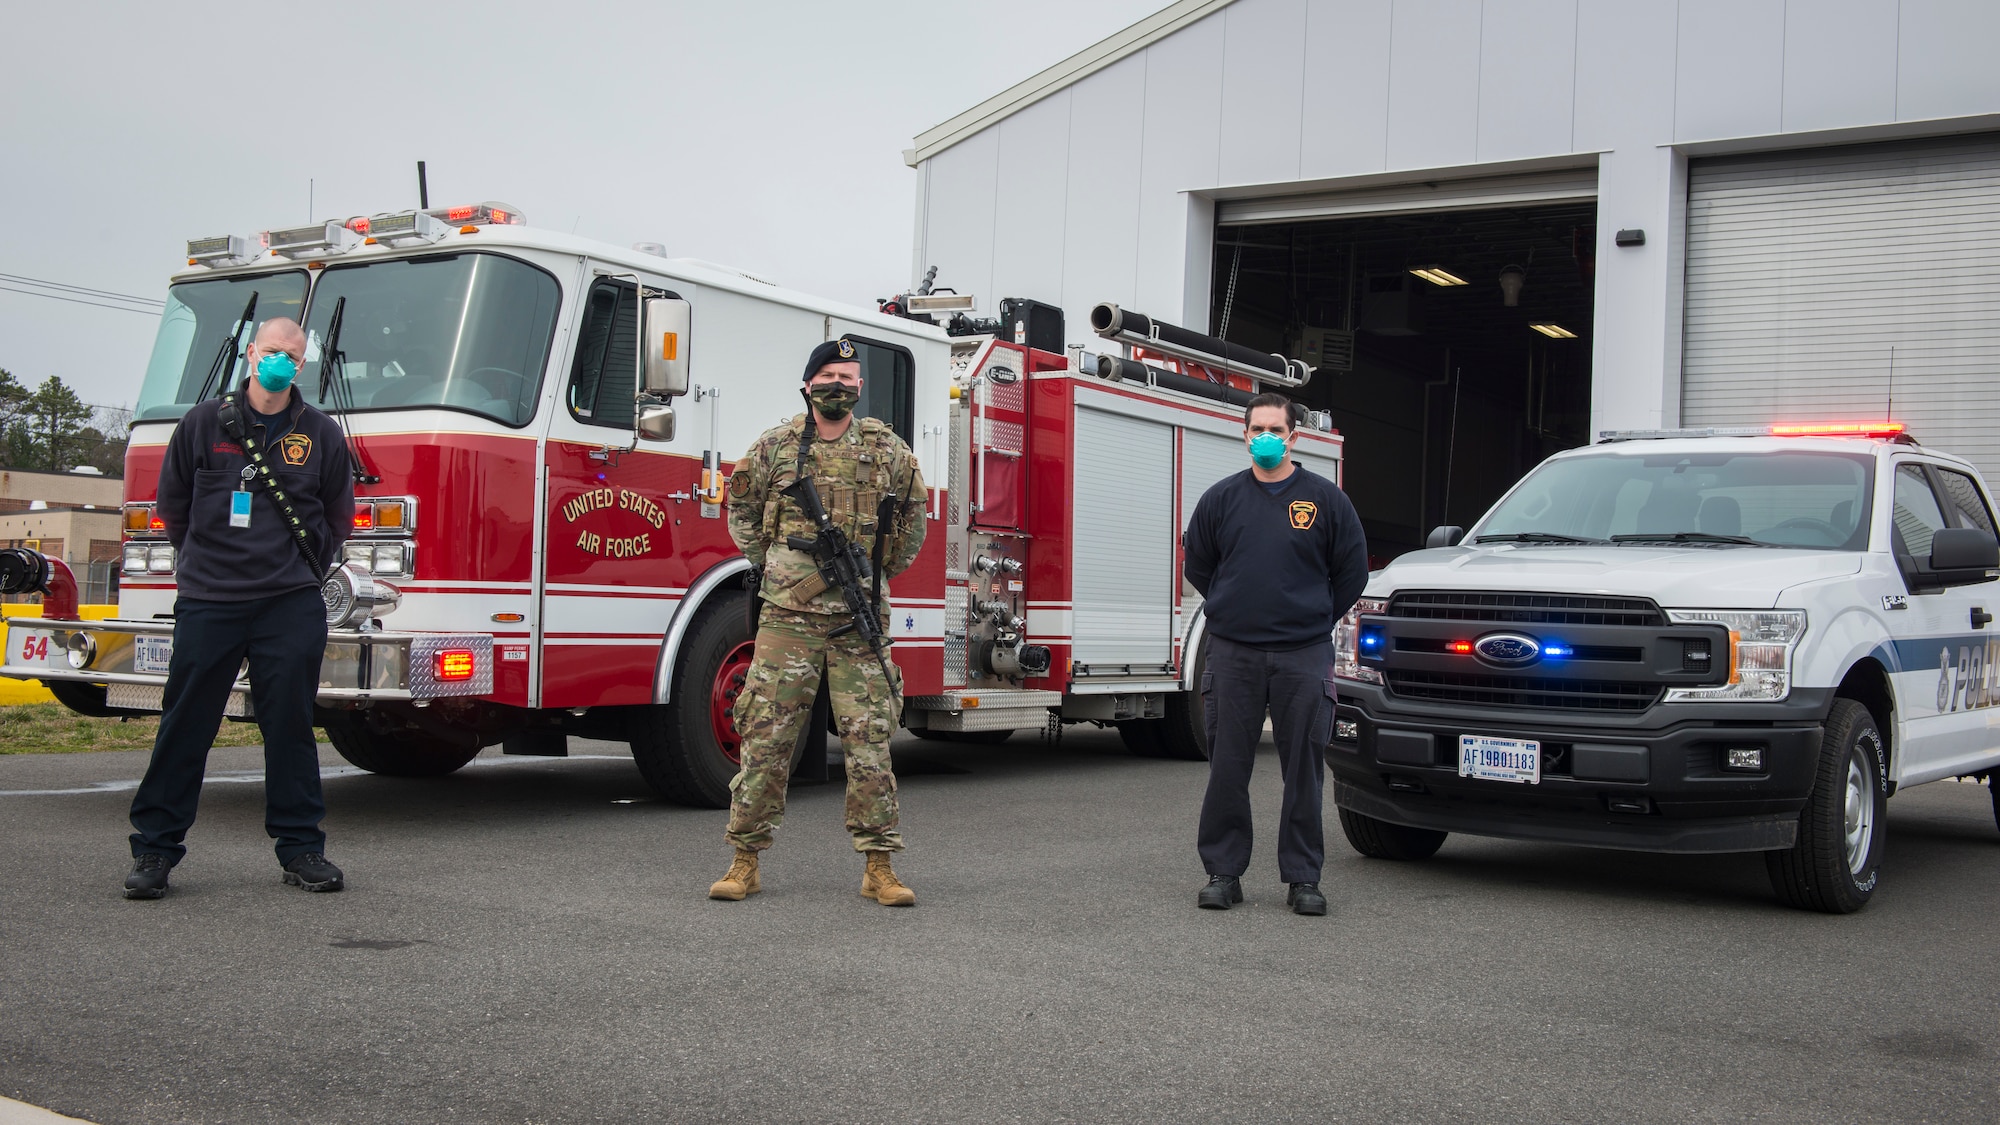 Connecticut Air National Guard fire department and Security Forces personnel at the Bradley Air National Guard Base fire house in East Granby, Connecticut, April 20, 2020. The base fire department and 103rd Security Forces Squadron continue to operate around the clock to ensure the safety and security of Connecticut Air National Guard personnel and provide support to mutual aid emergency response partners during the COVID-19 pandemic. (U.S. Air National Guard photo by Staff Sgt. Steven Tucker)